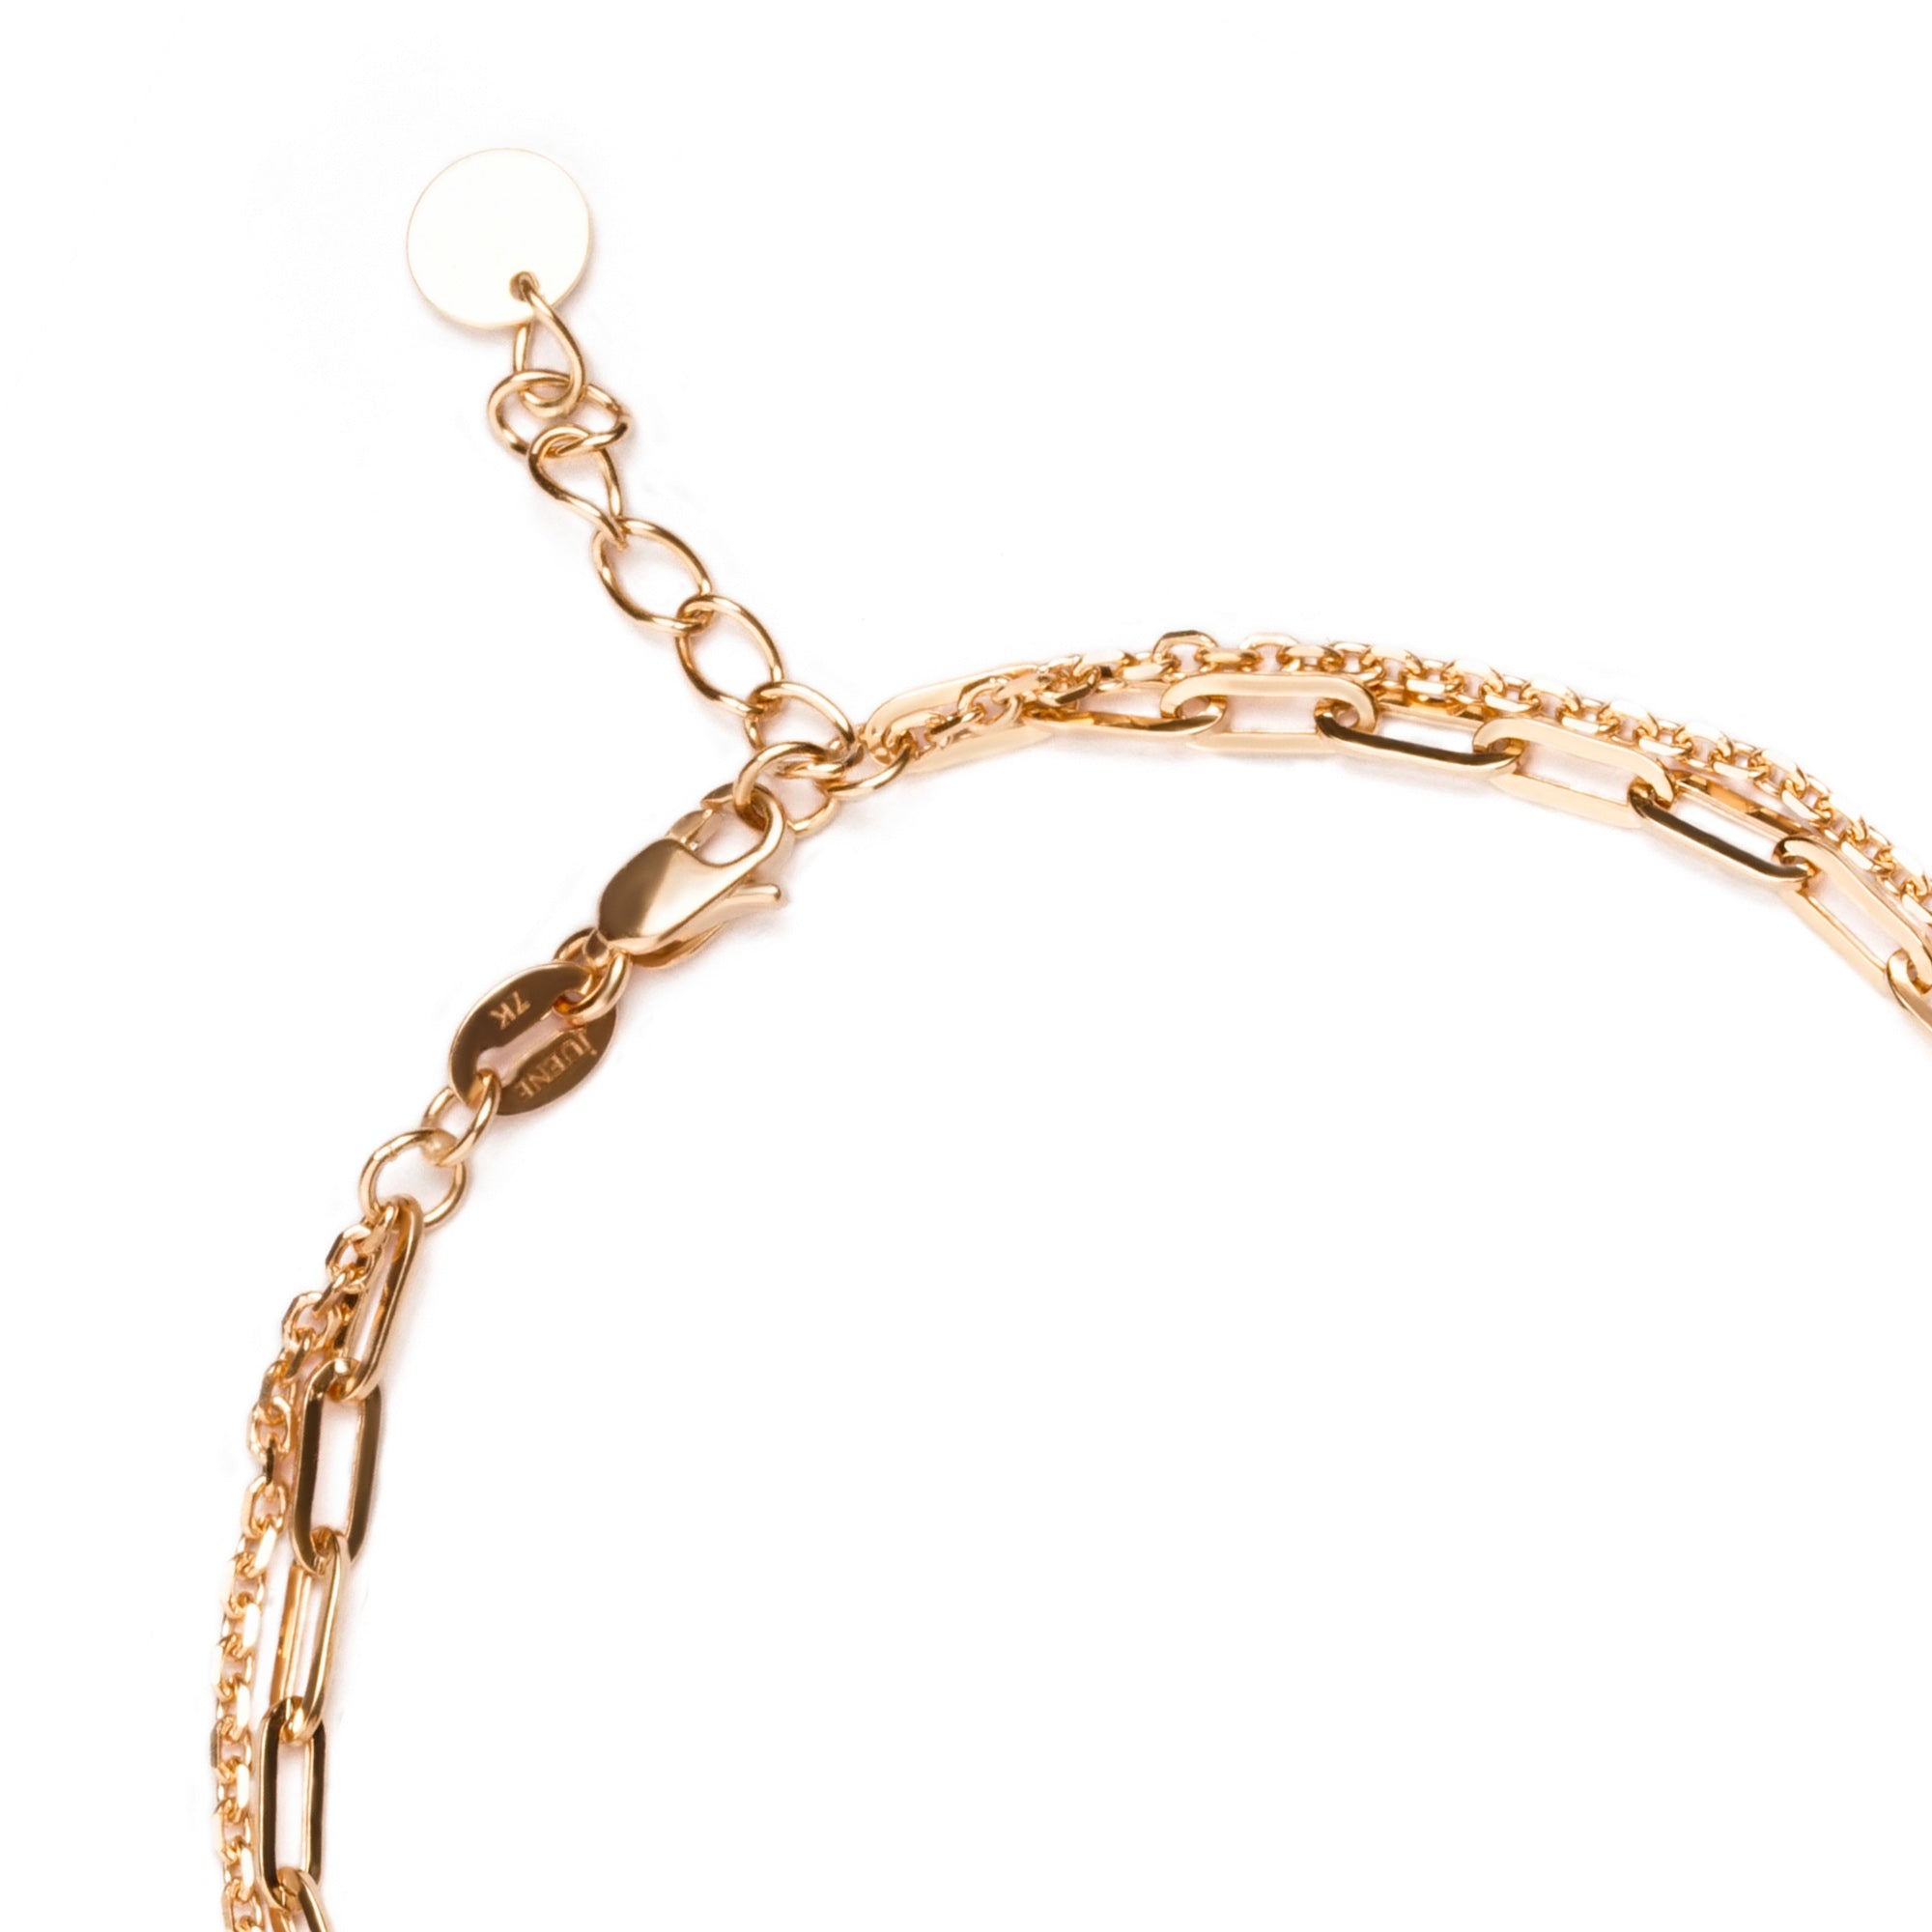 Somi Gold Bracelet - Modest Collection - Juene Jewelry